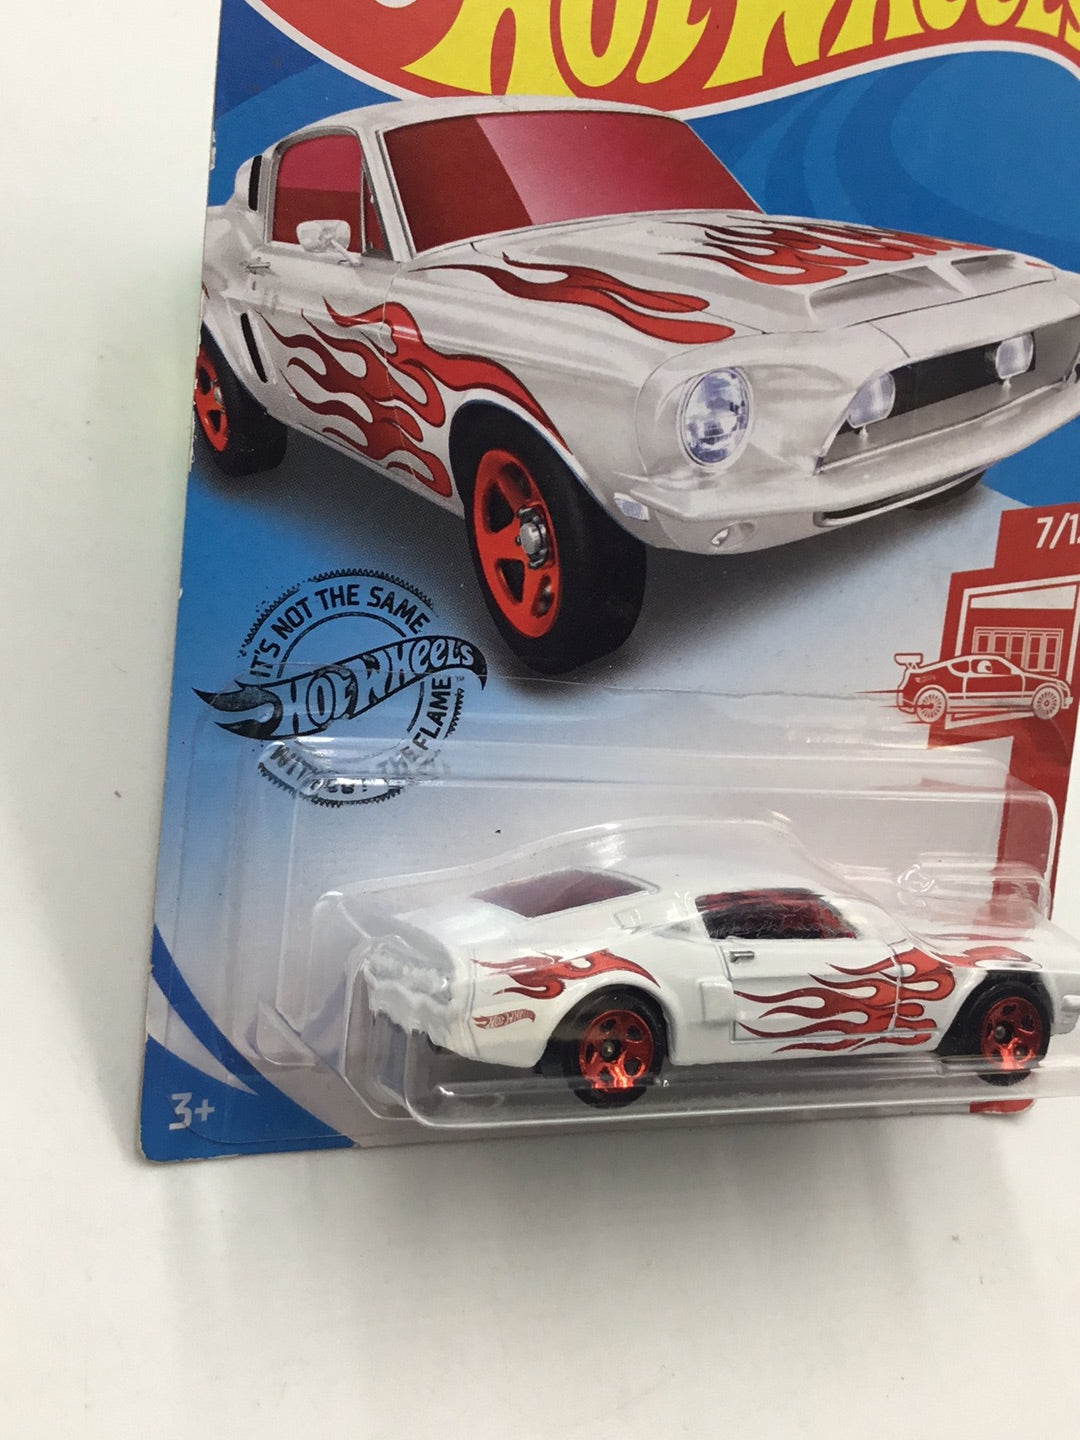 2020 hot wheels red edition #169 68 Shelby GT500 target red AA2